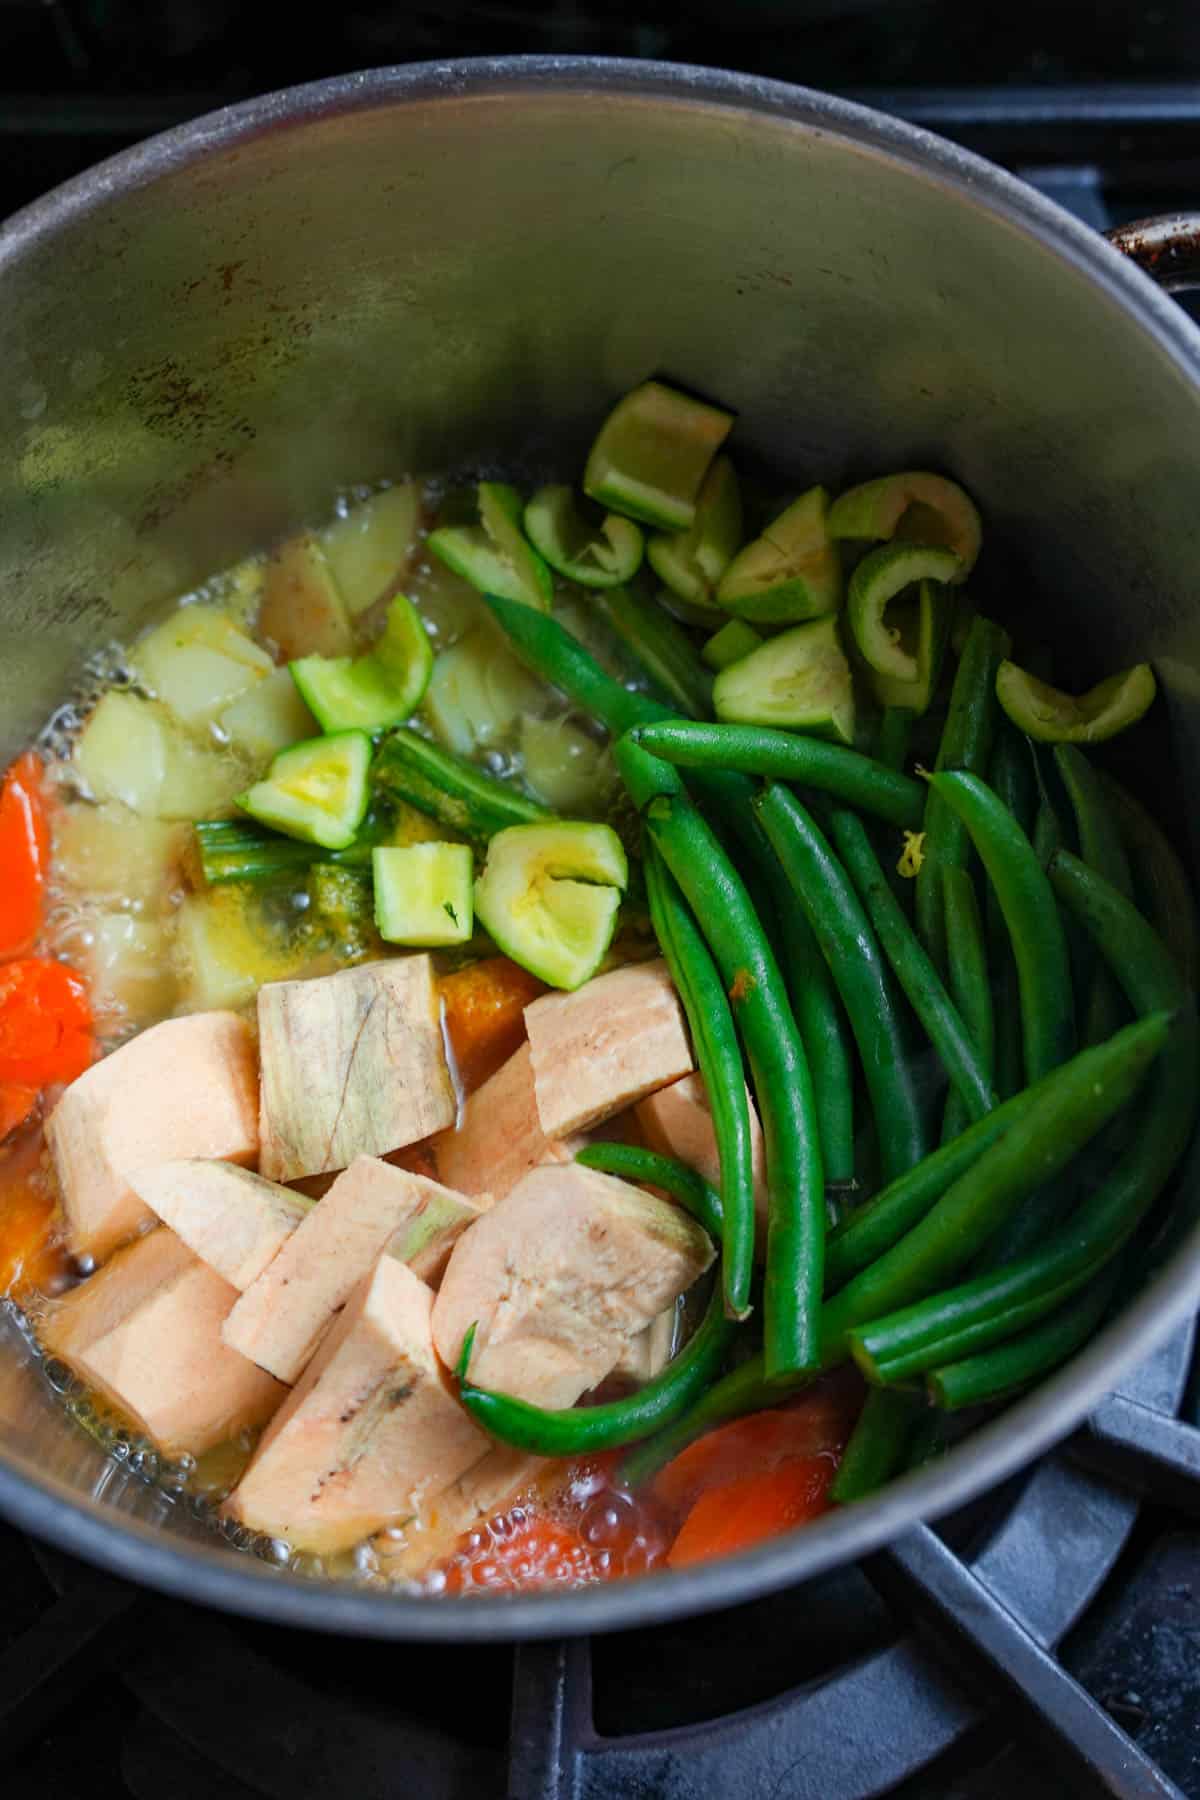 Tindora, string beans and plantain are added to the pot of cooking vegetables on the stove.